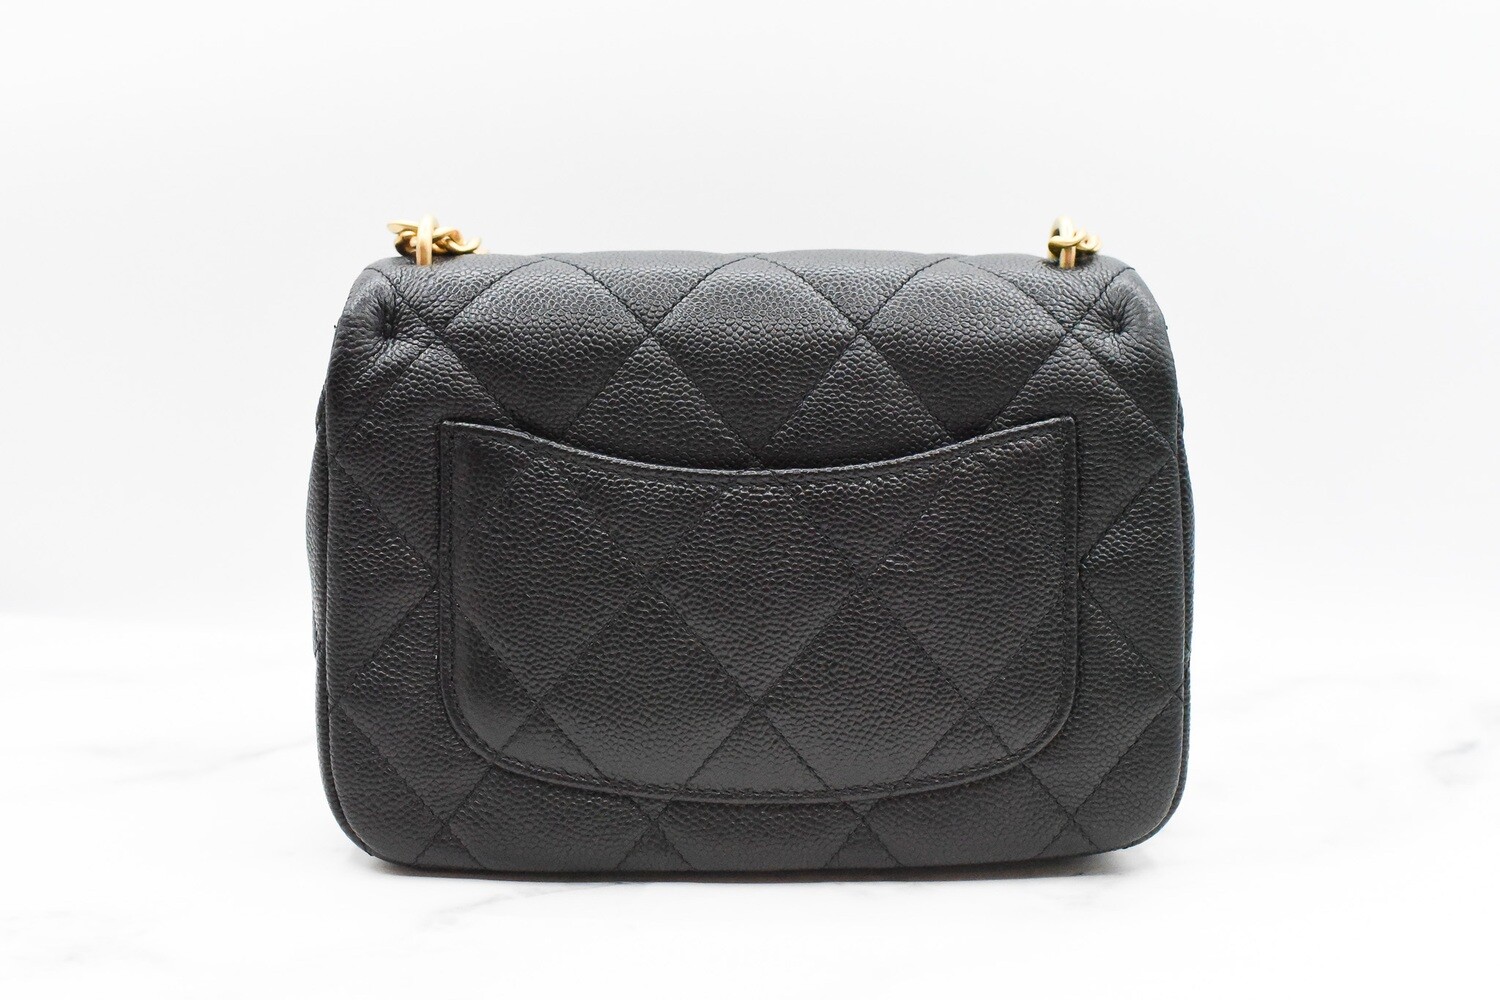 Chanel Black Quilted Caviar Top Handle Clutch With Strap